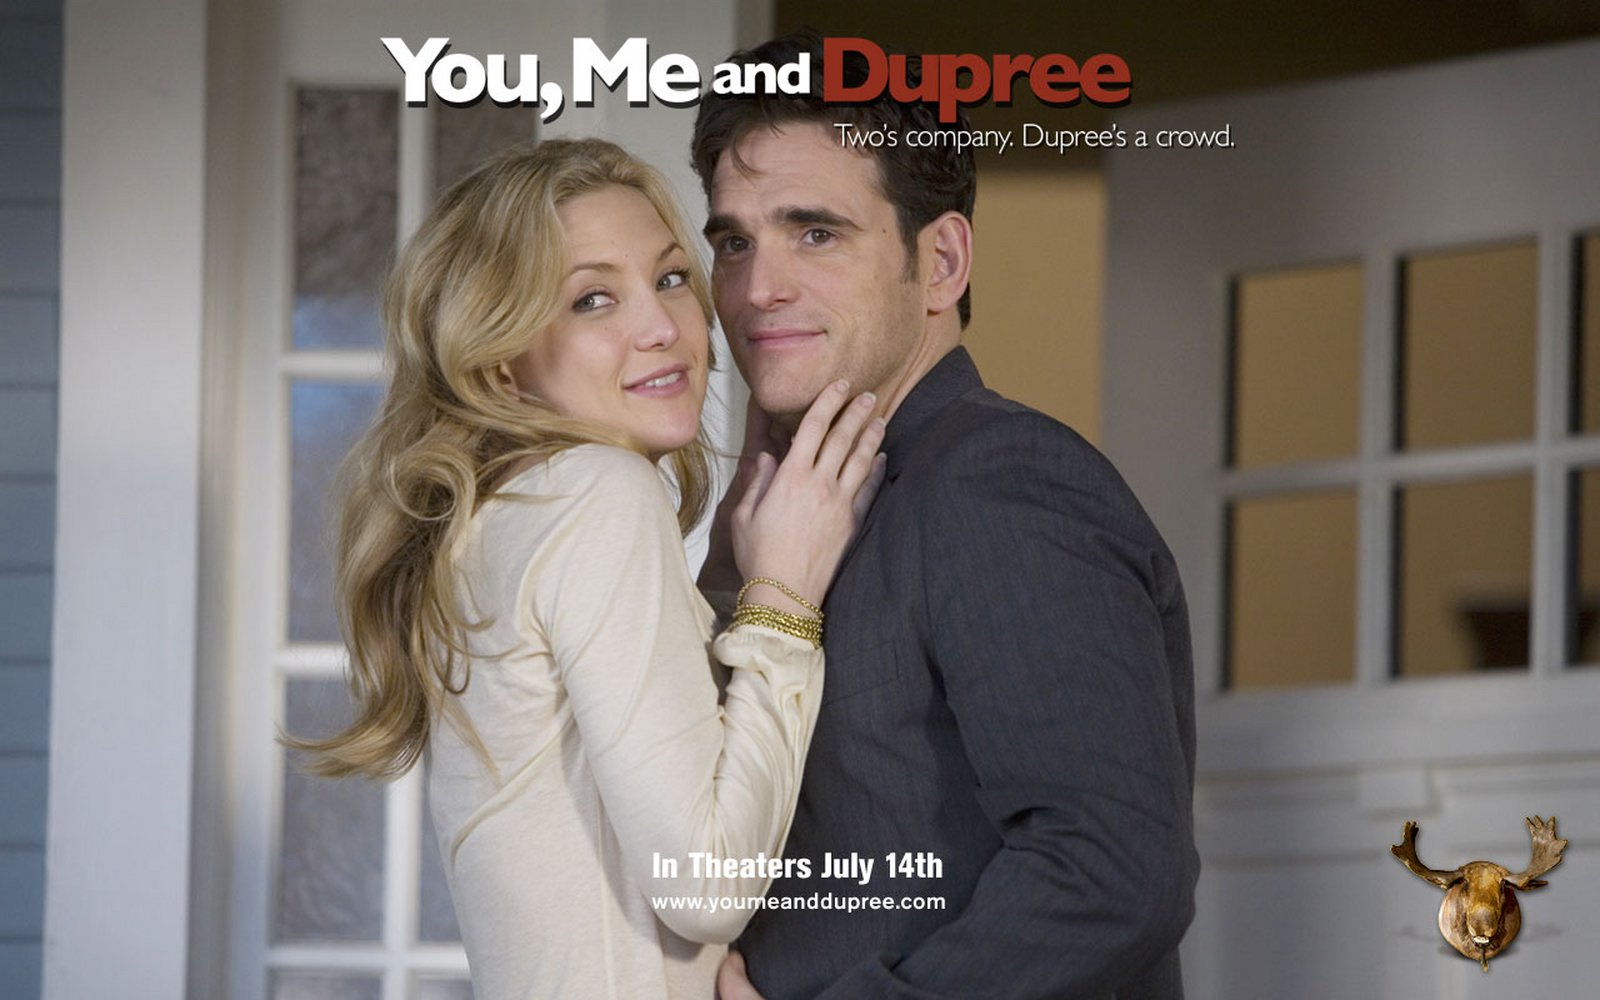 You and me and he. You, me and the movies. You me and Dupree.